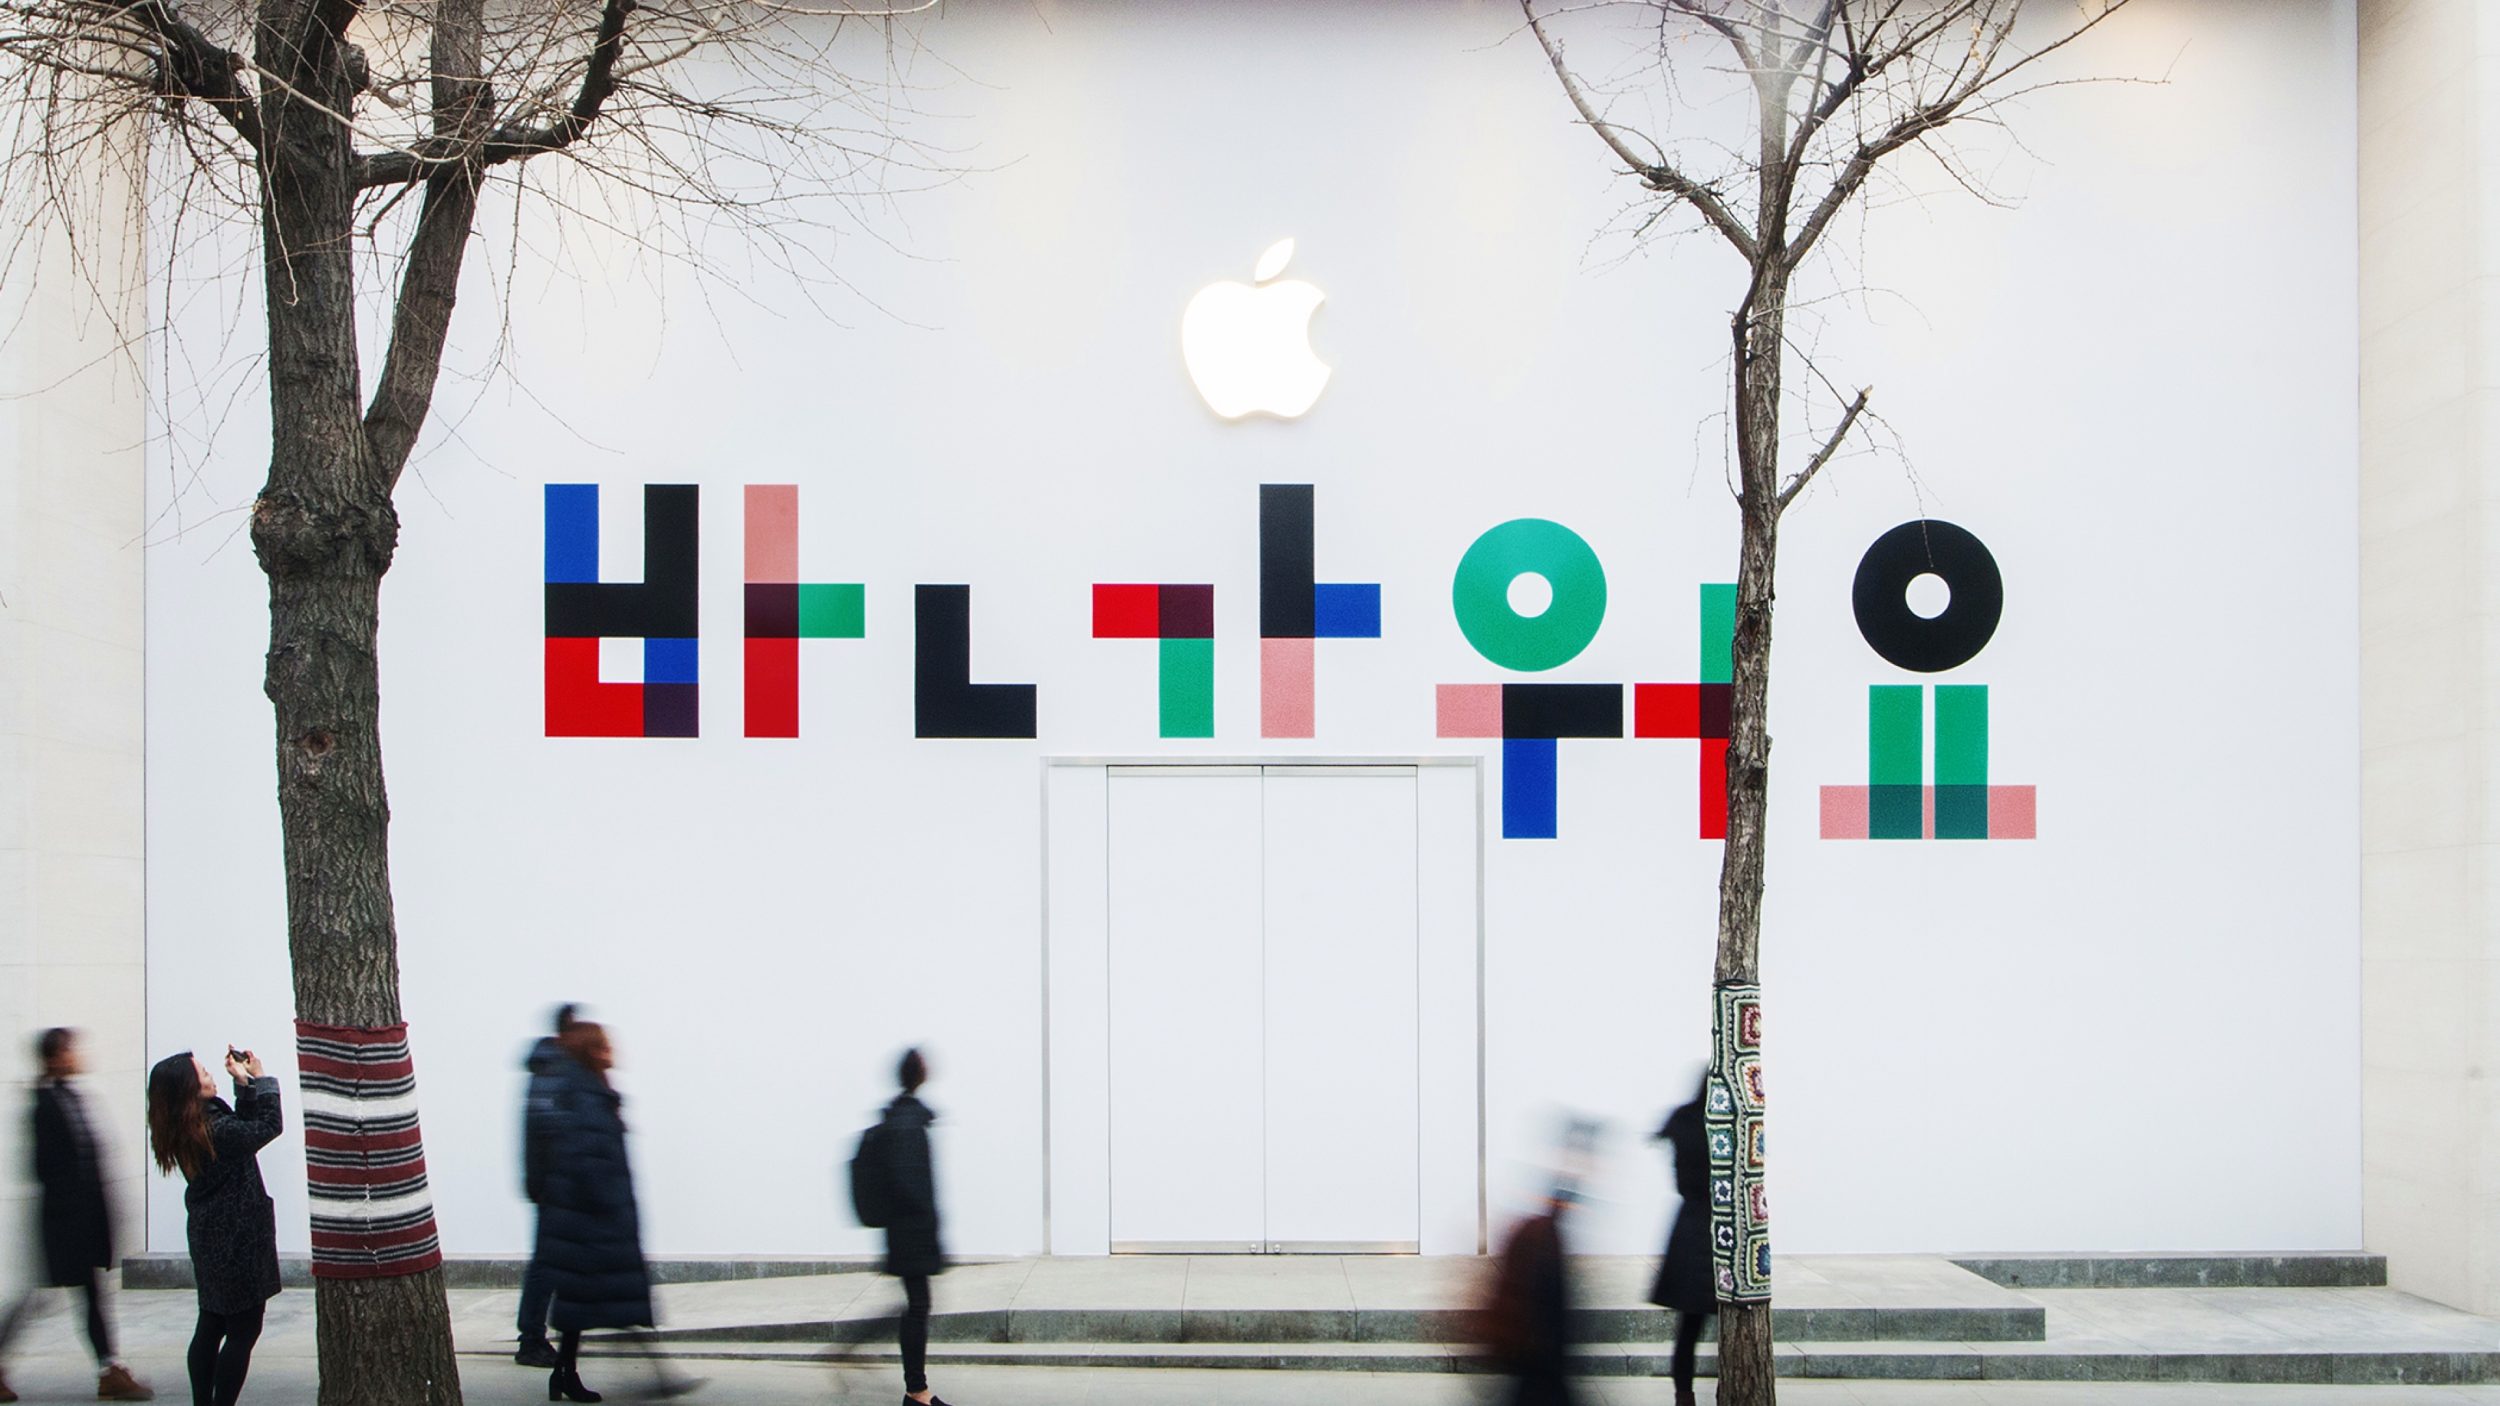  Apple’s First Korean Store Rises Colorful 